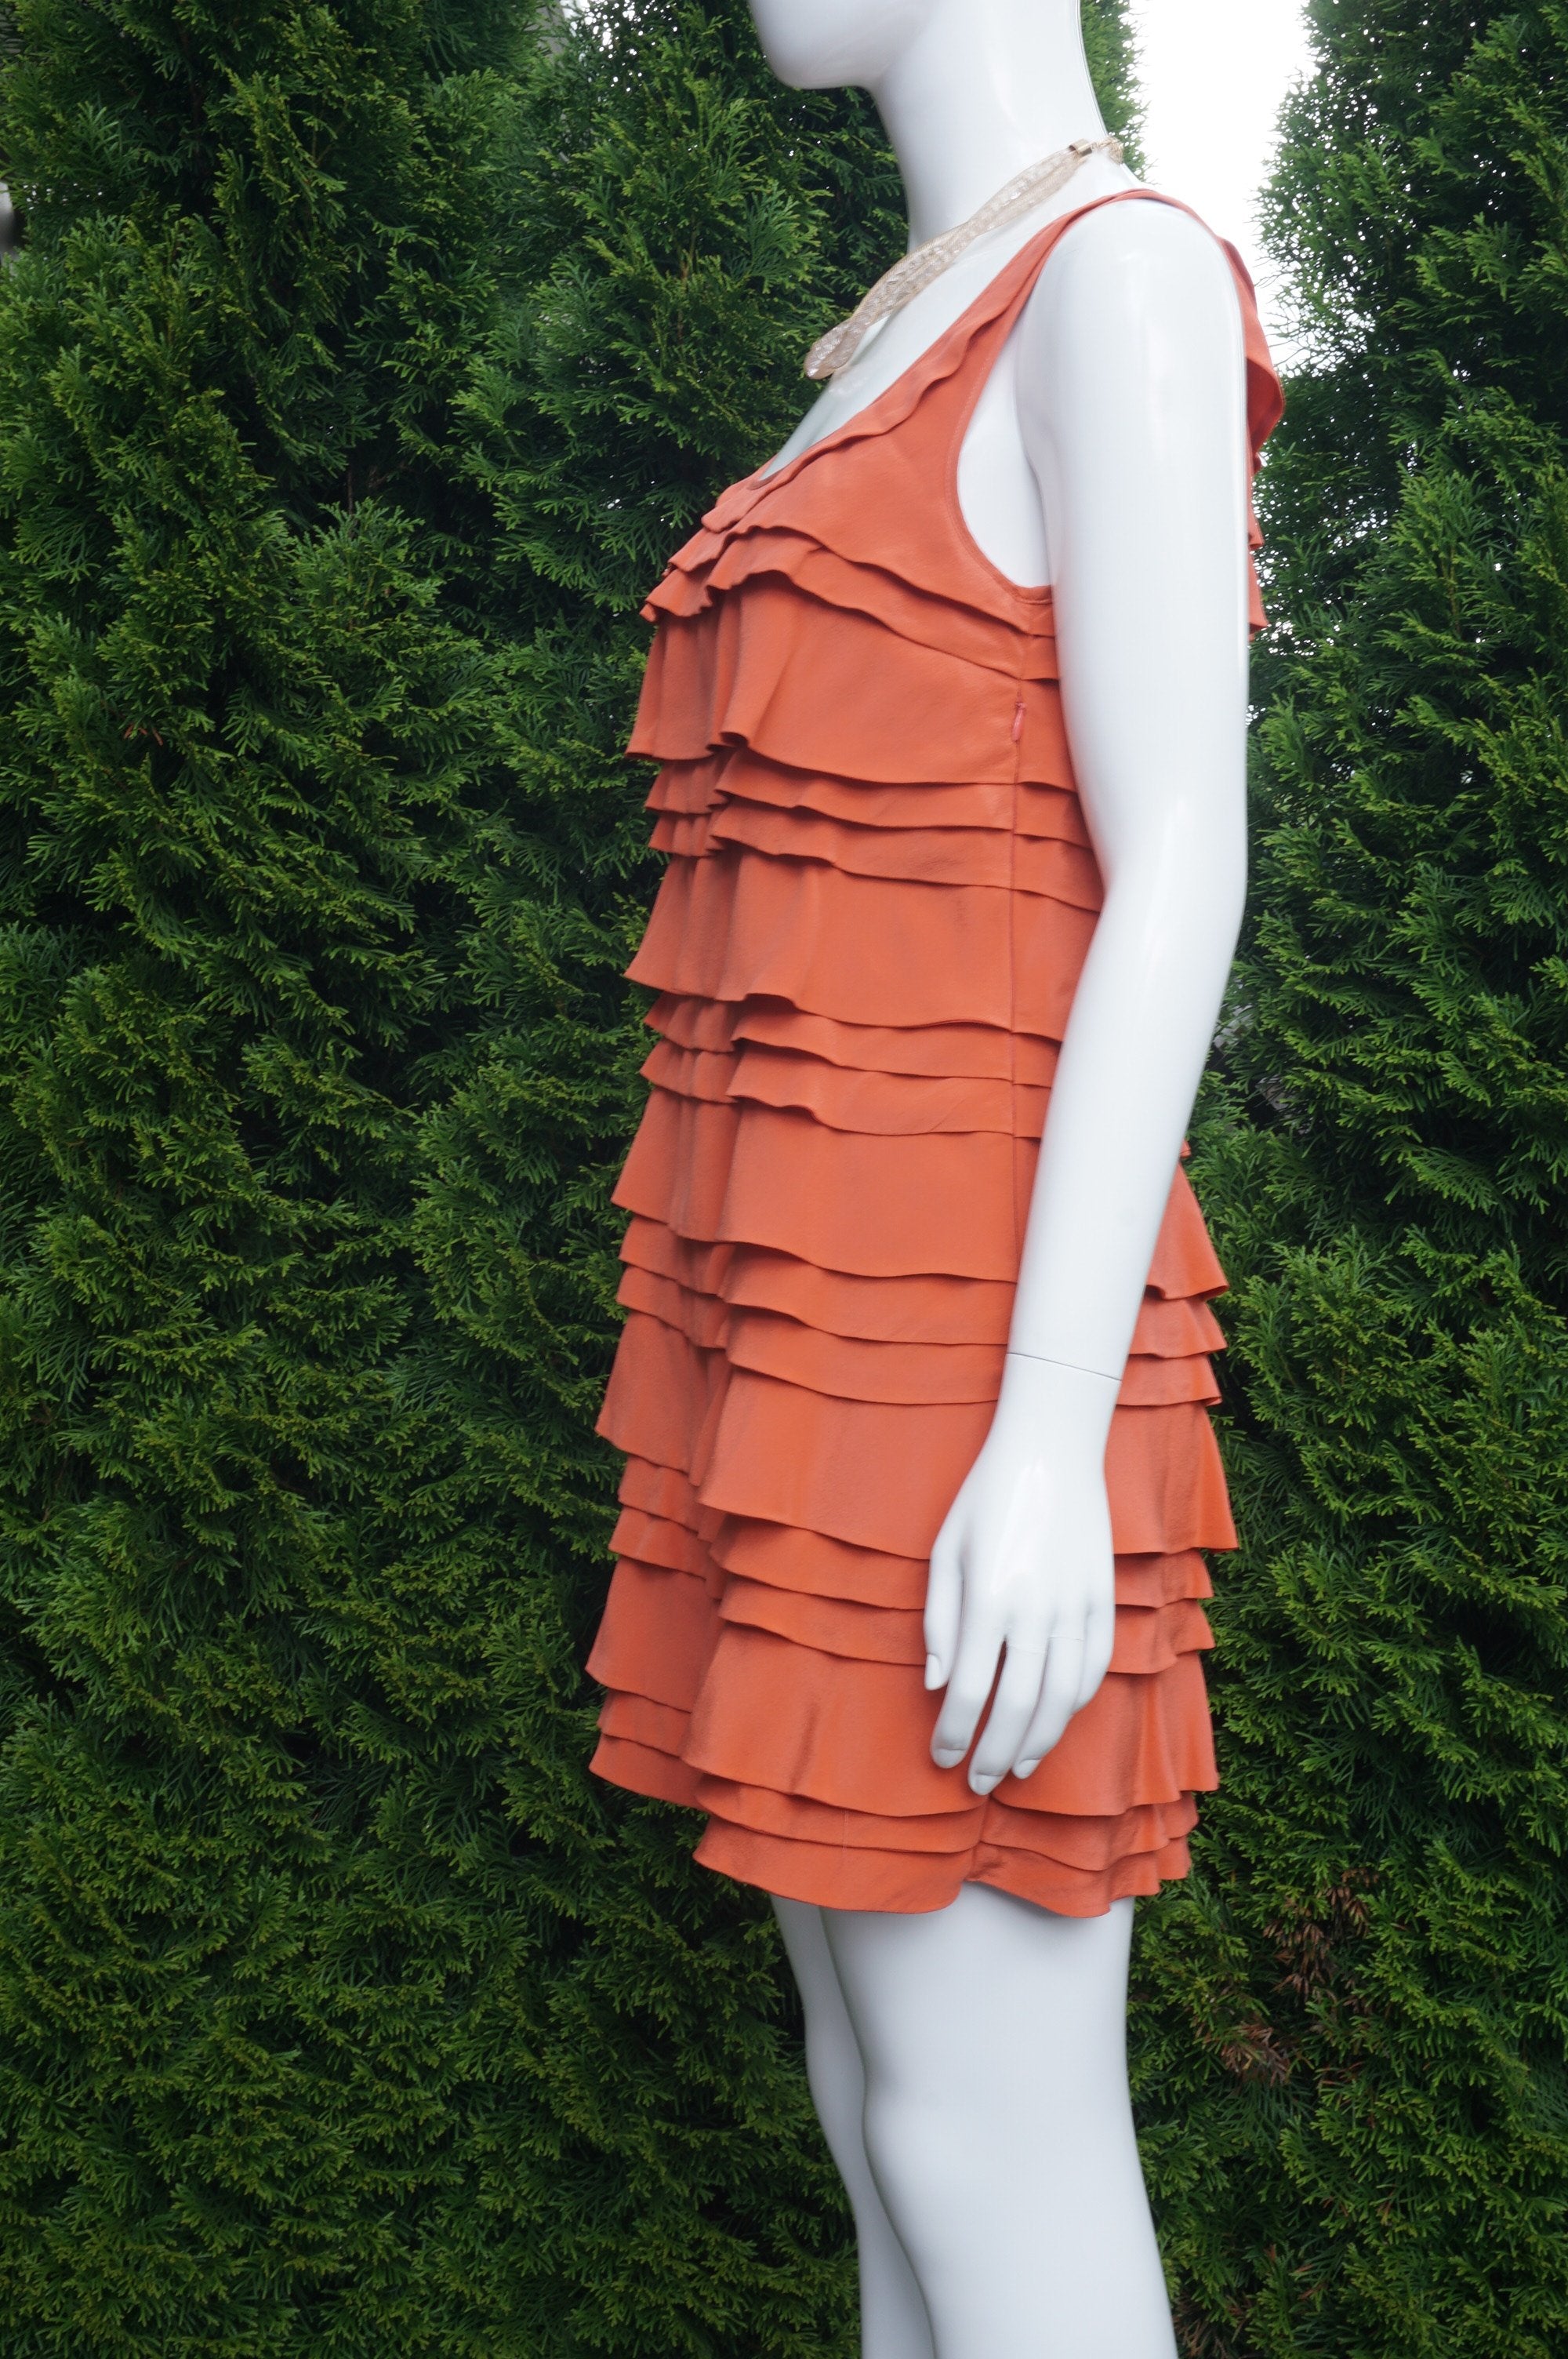 French Connection Orange Silk Sleeveless Ruffle Dress, bust 34 inches, Waist 32 inches, length 32 inches. Zipper on left side. , Orange, Outer shell: 100% silk, back shell: 100% Polyester, lining: 100% polyester, women's Dresses & Rompers, women's Orange Dresses & Rompers, French Connection women's Dresses & Rompers, ruffle dress, orange dress, sleeveless dress